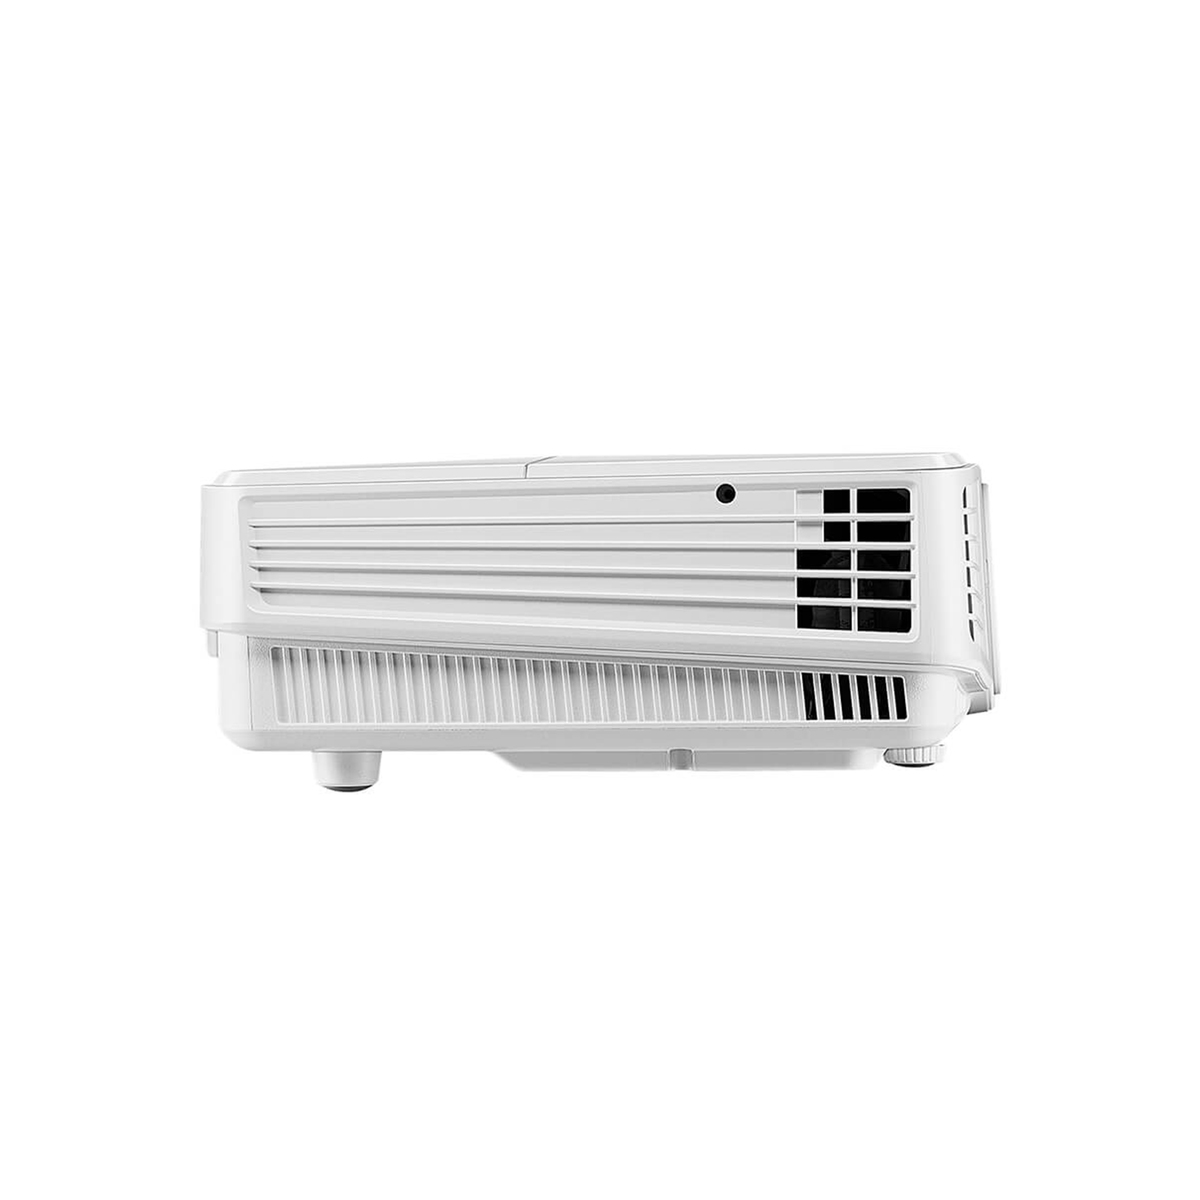 Benq Eco-friendly SVGA Business Projector MS527